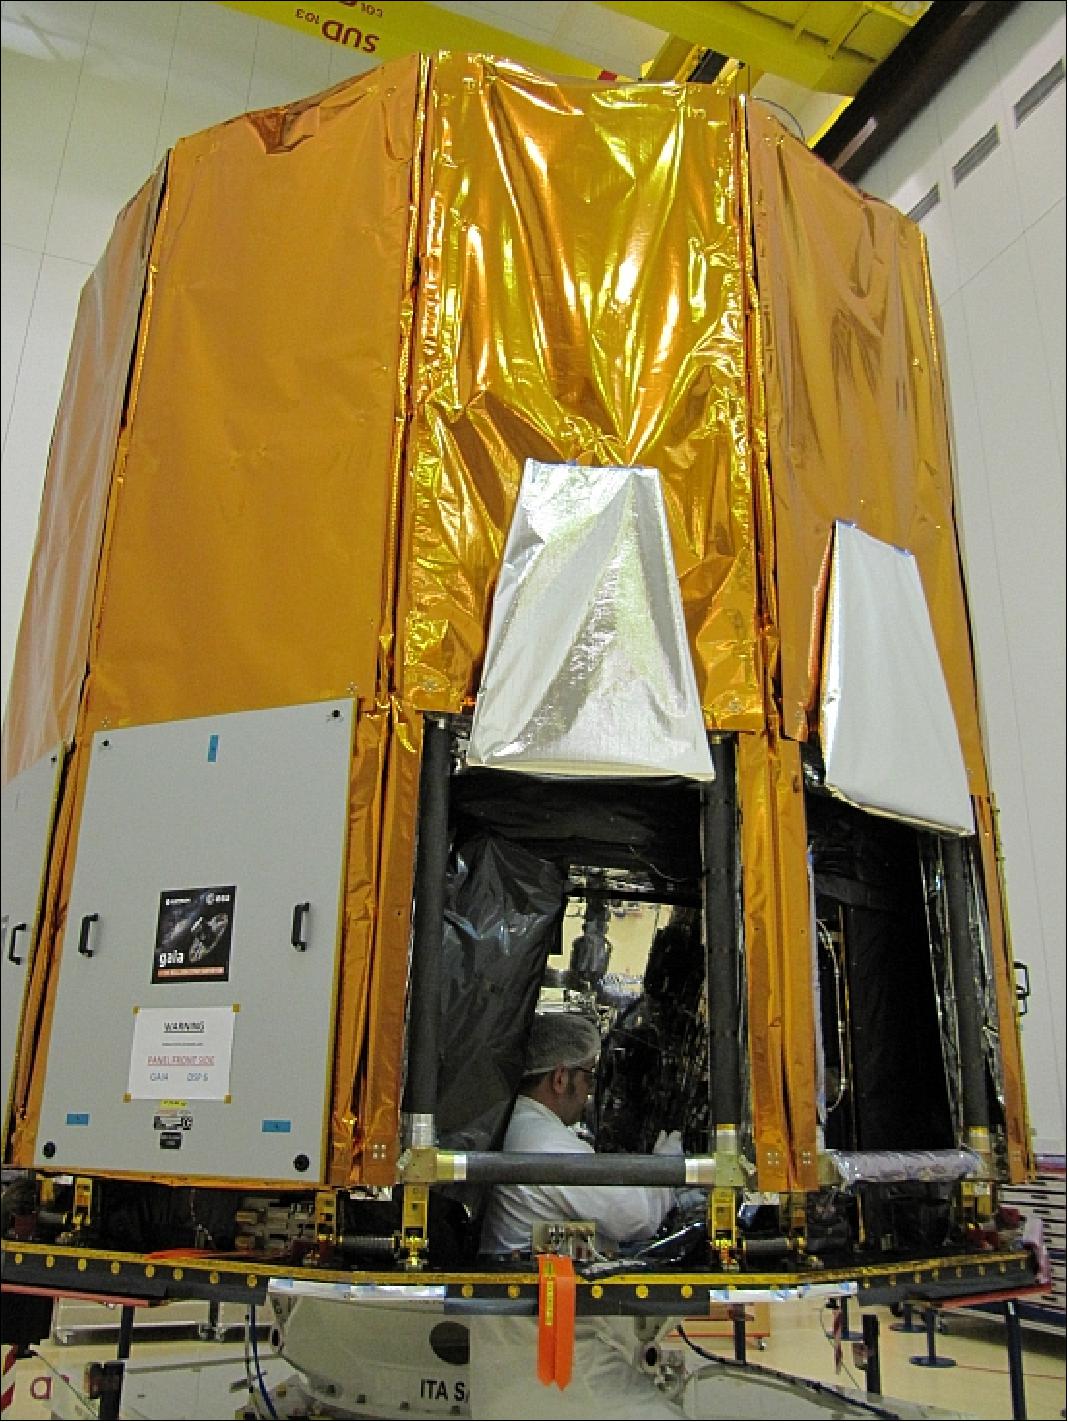 Figure 17: Photo of the Gaia spacecraft in Nov. 2013 with an Astrium AIT engineer installing the transponders at the launch site (image credit: ESA)